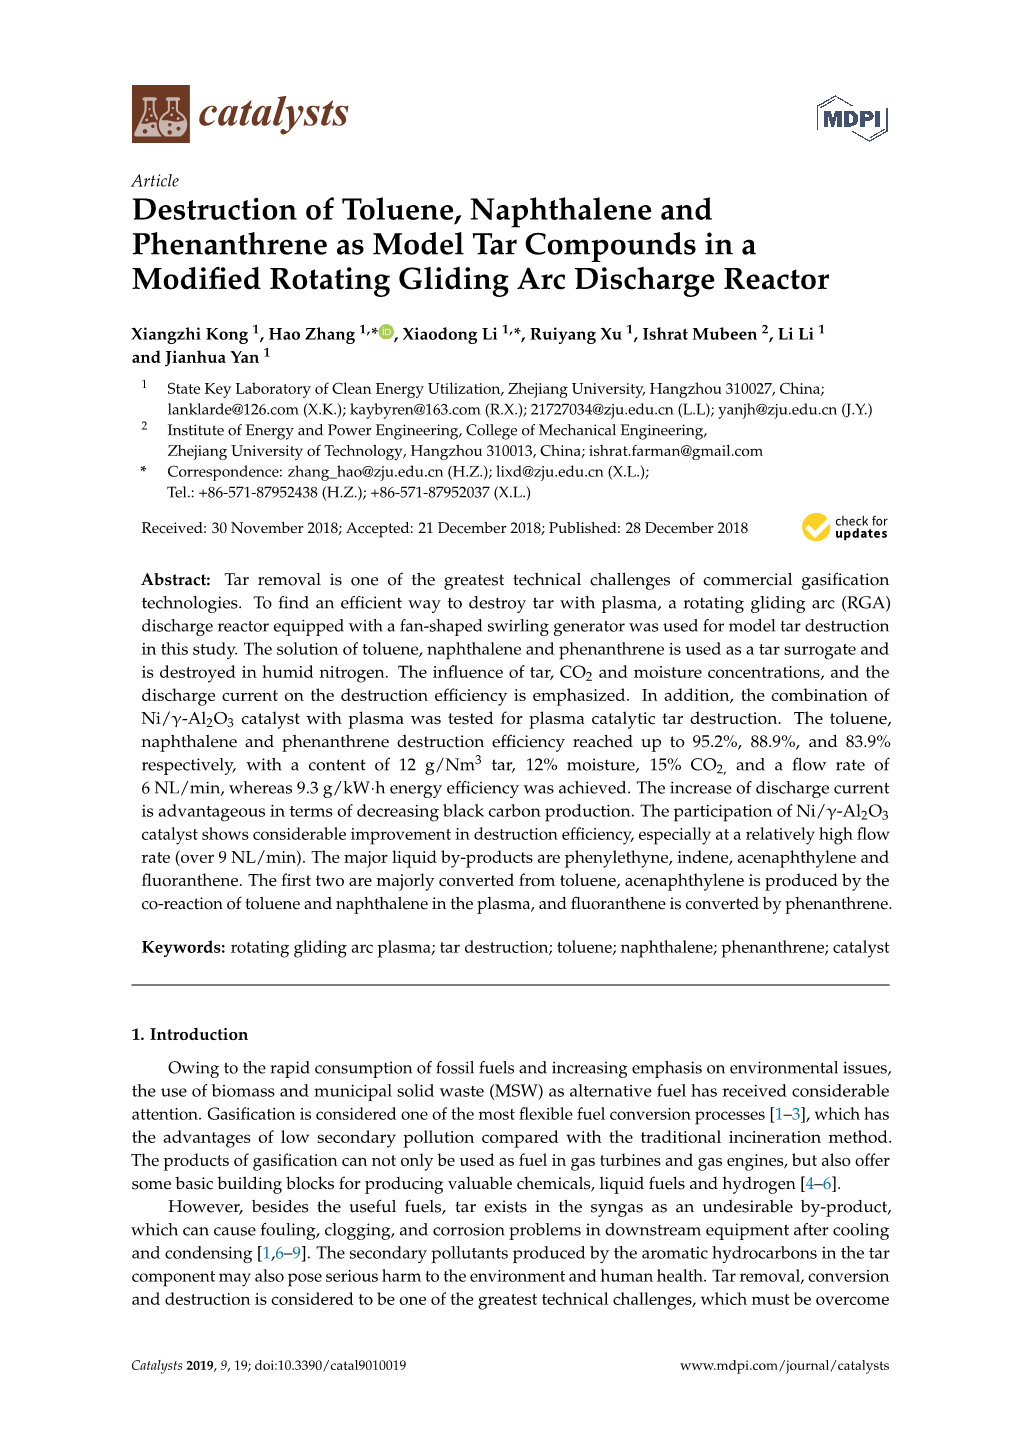 Destruction of Toluene, Naphthalene and Phenanthrene As Model Tar Compounds in a Modiﬁed Rotating Gliding Arc Discharge Reactor